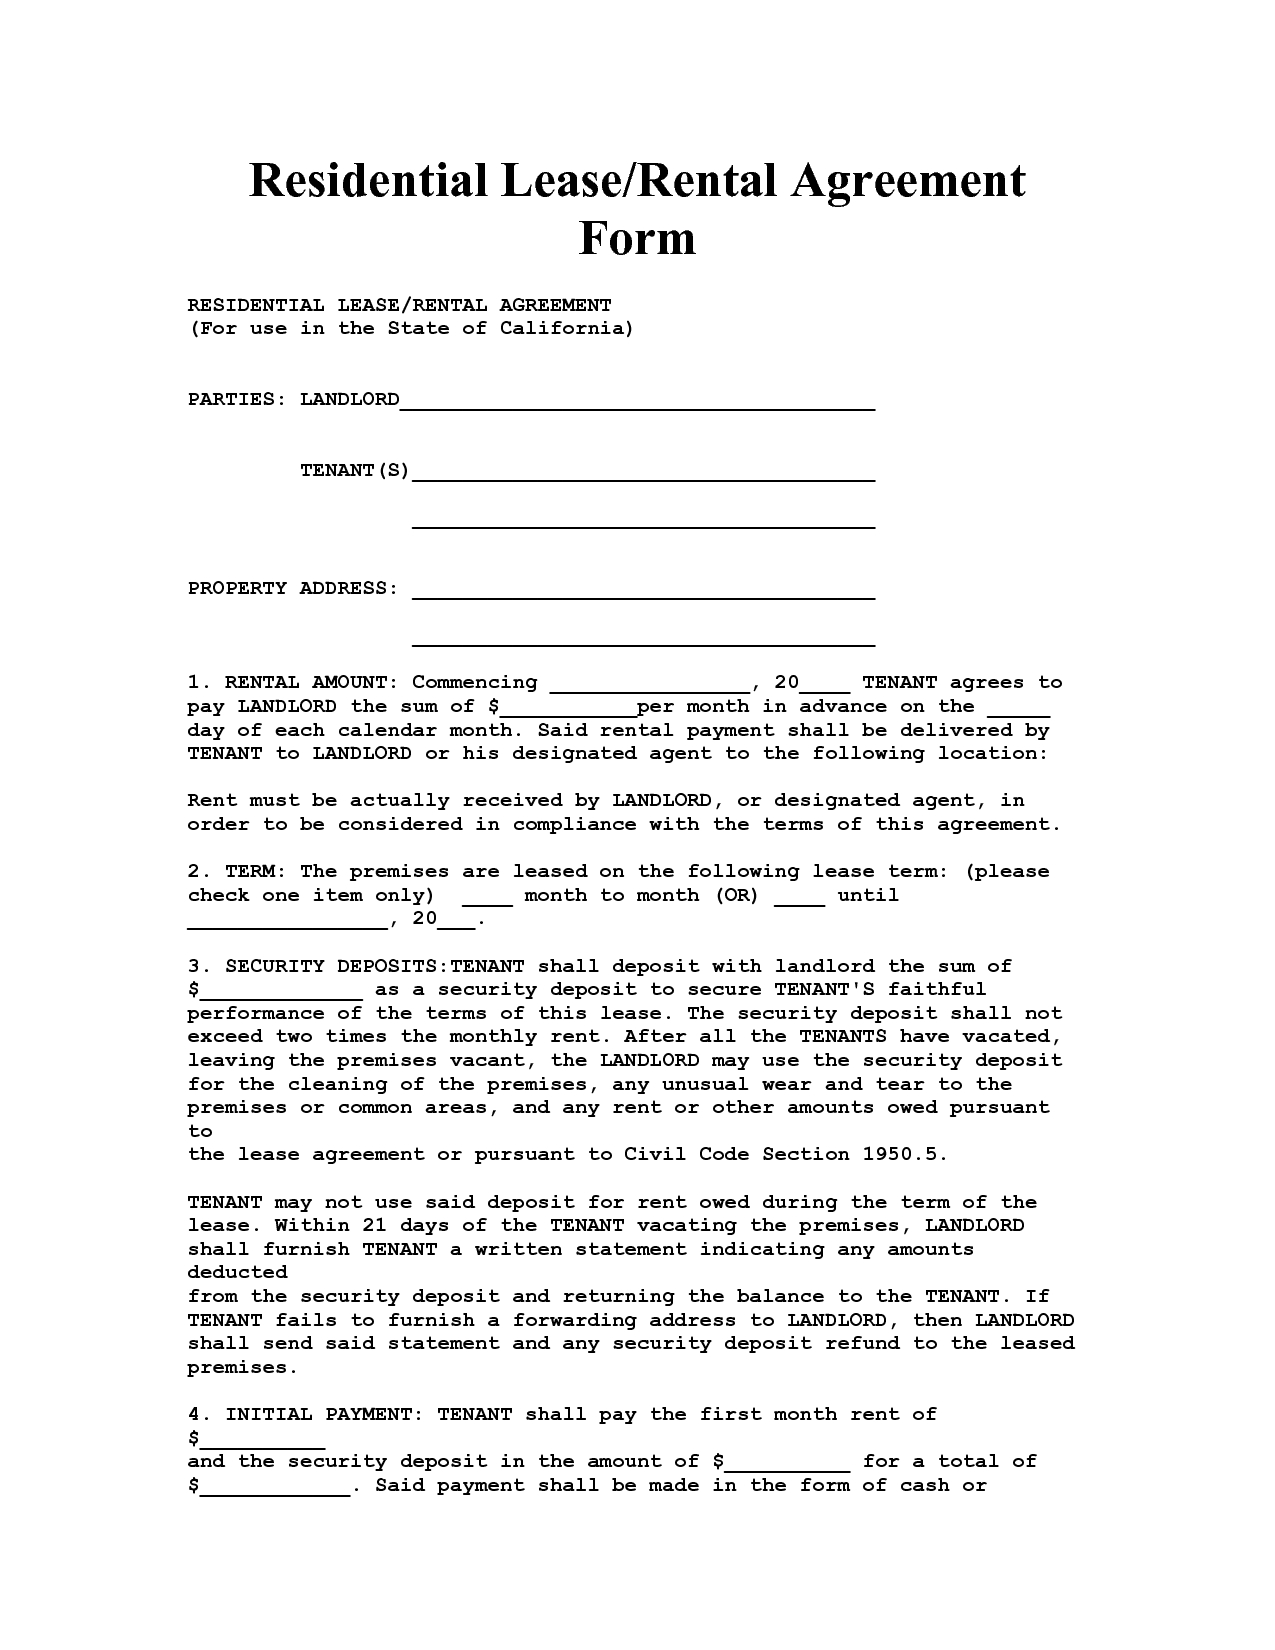 Template Free Room Rental Lease Agreement For Rentalfree Ideas within Irish Lease Agreement Template